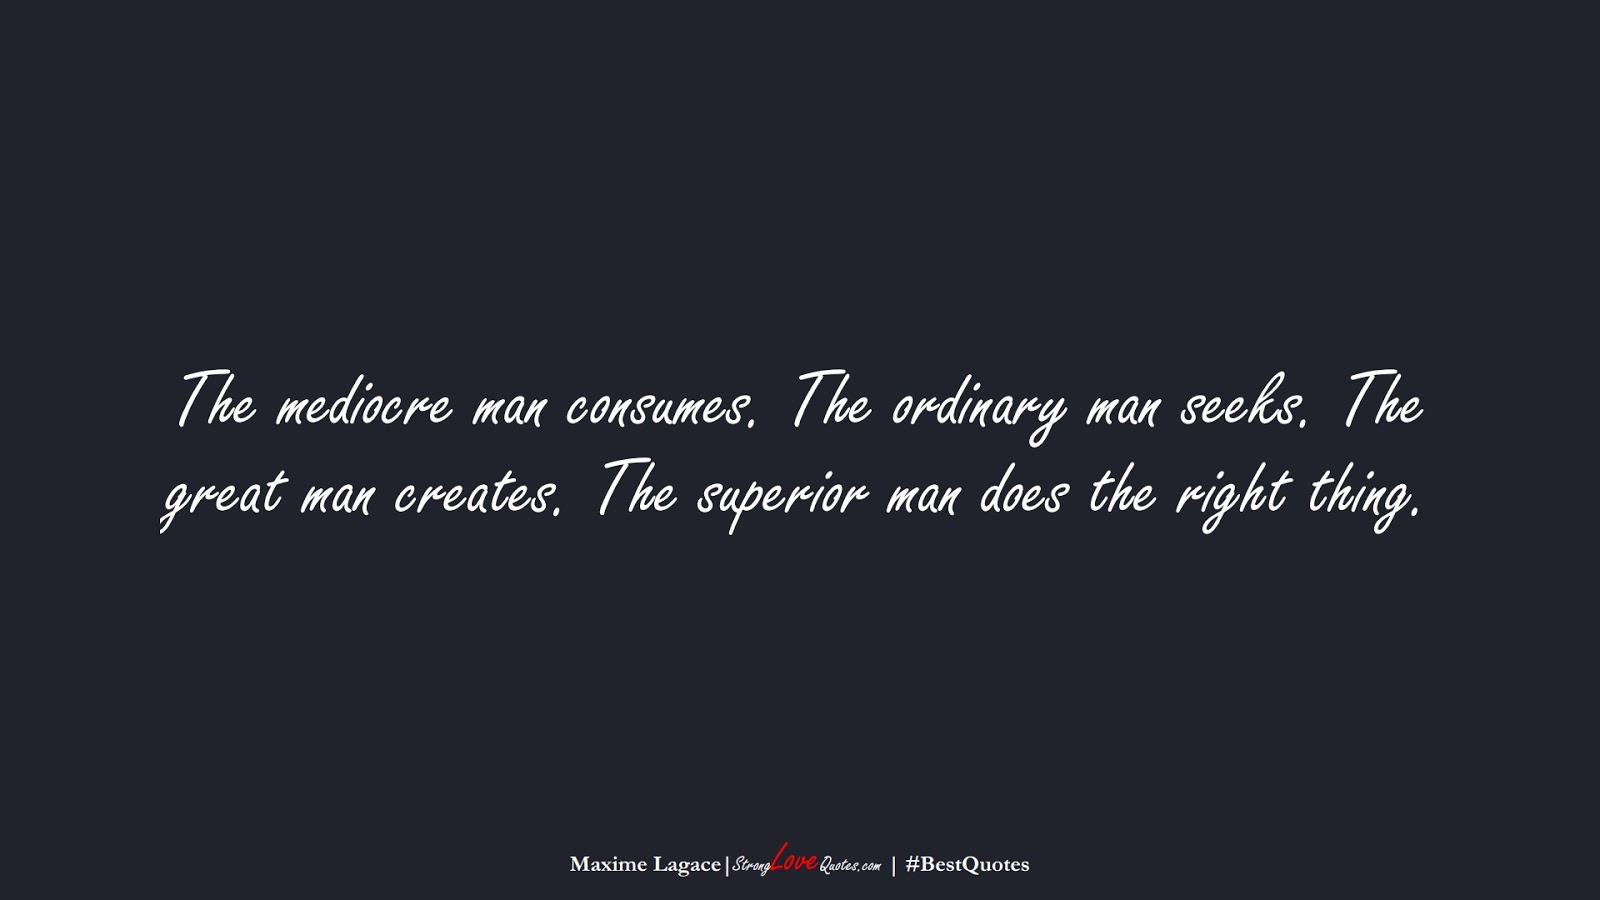 The mediocre man consumes. The ordinary man seeks. The great man creates. The superior man does the right thing. (Maxime Lagace);  #BestQuotes